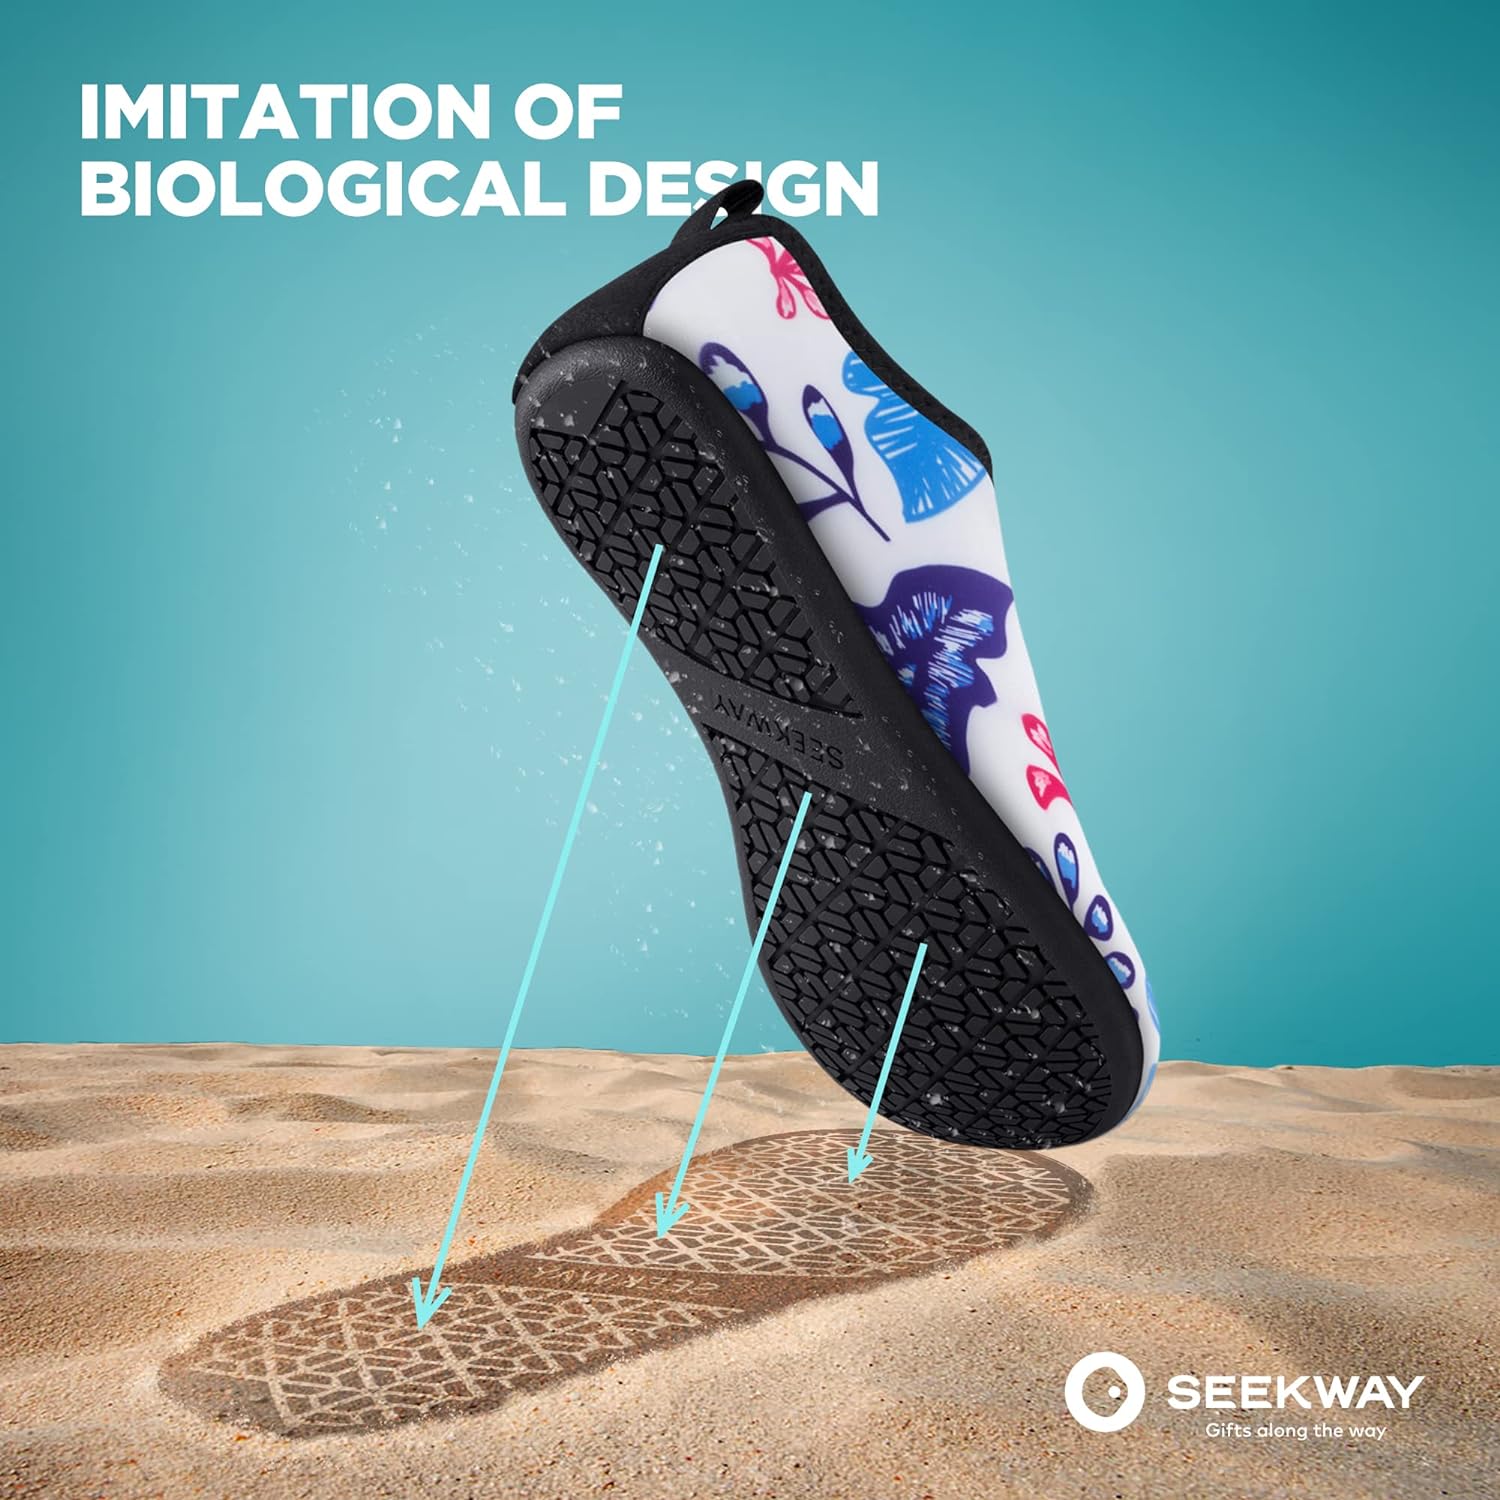 SEEKWAY Water Shoes Barefoot Aqua Socks Quick-Dry Non Slip Shoes for Beach Swim Pool River Boating Surf Women Men SK002 - SEEKWAY Water Shoes SK002 Review